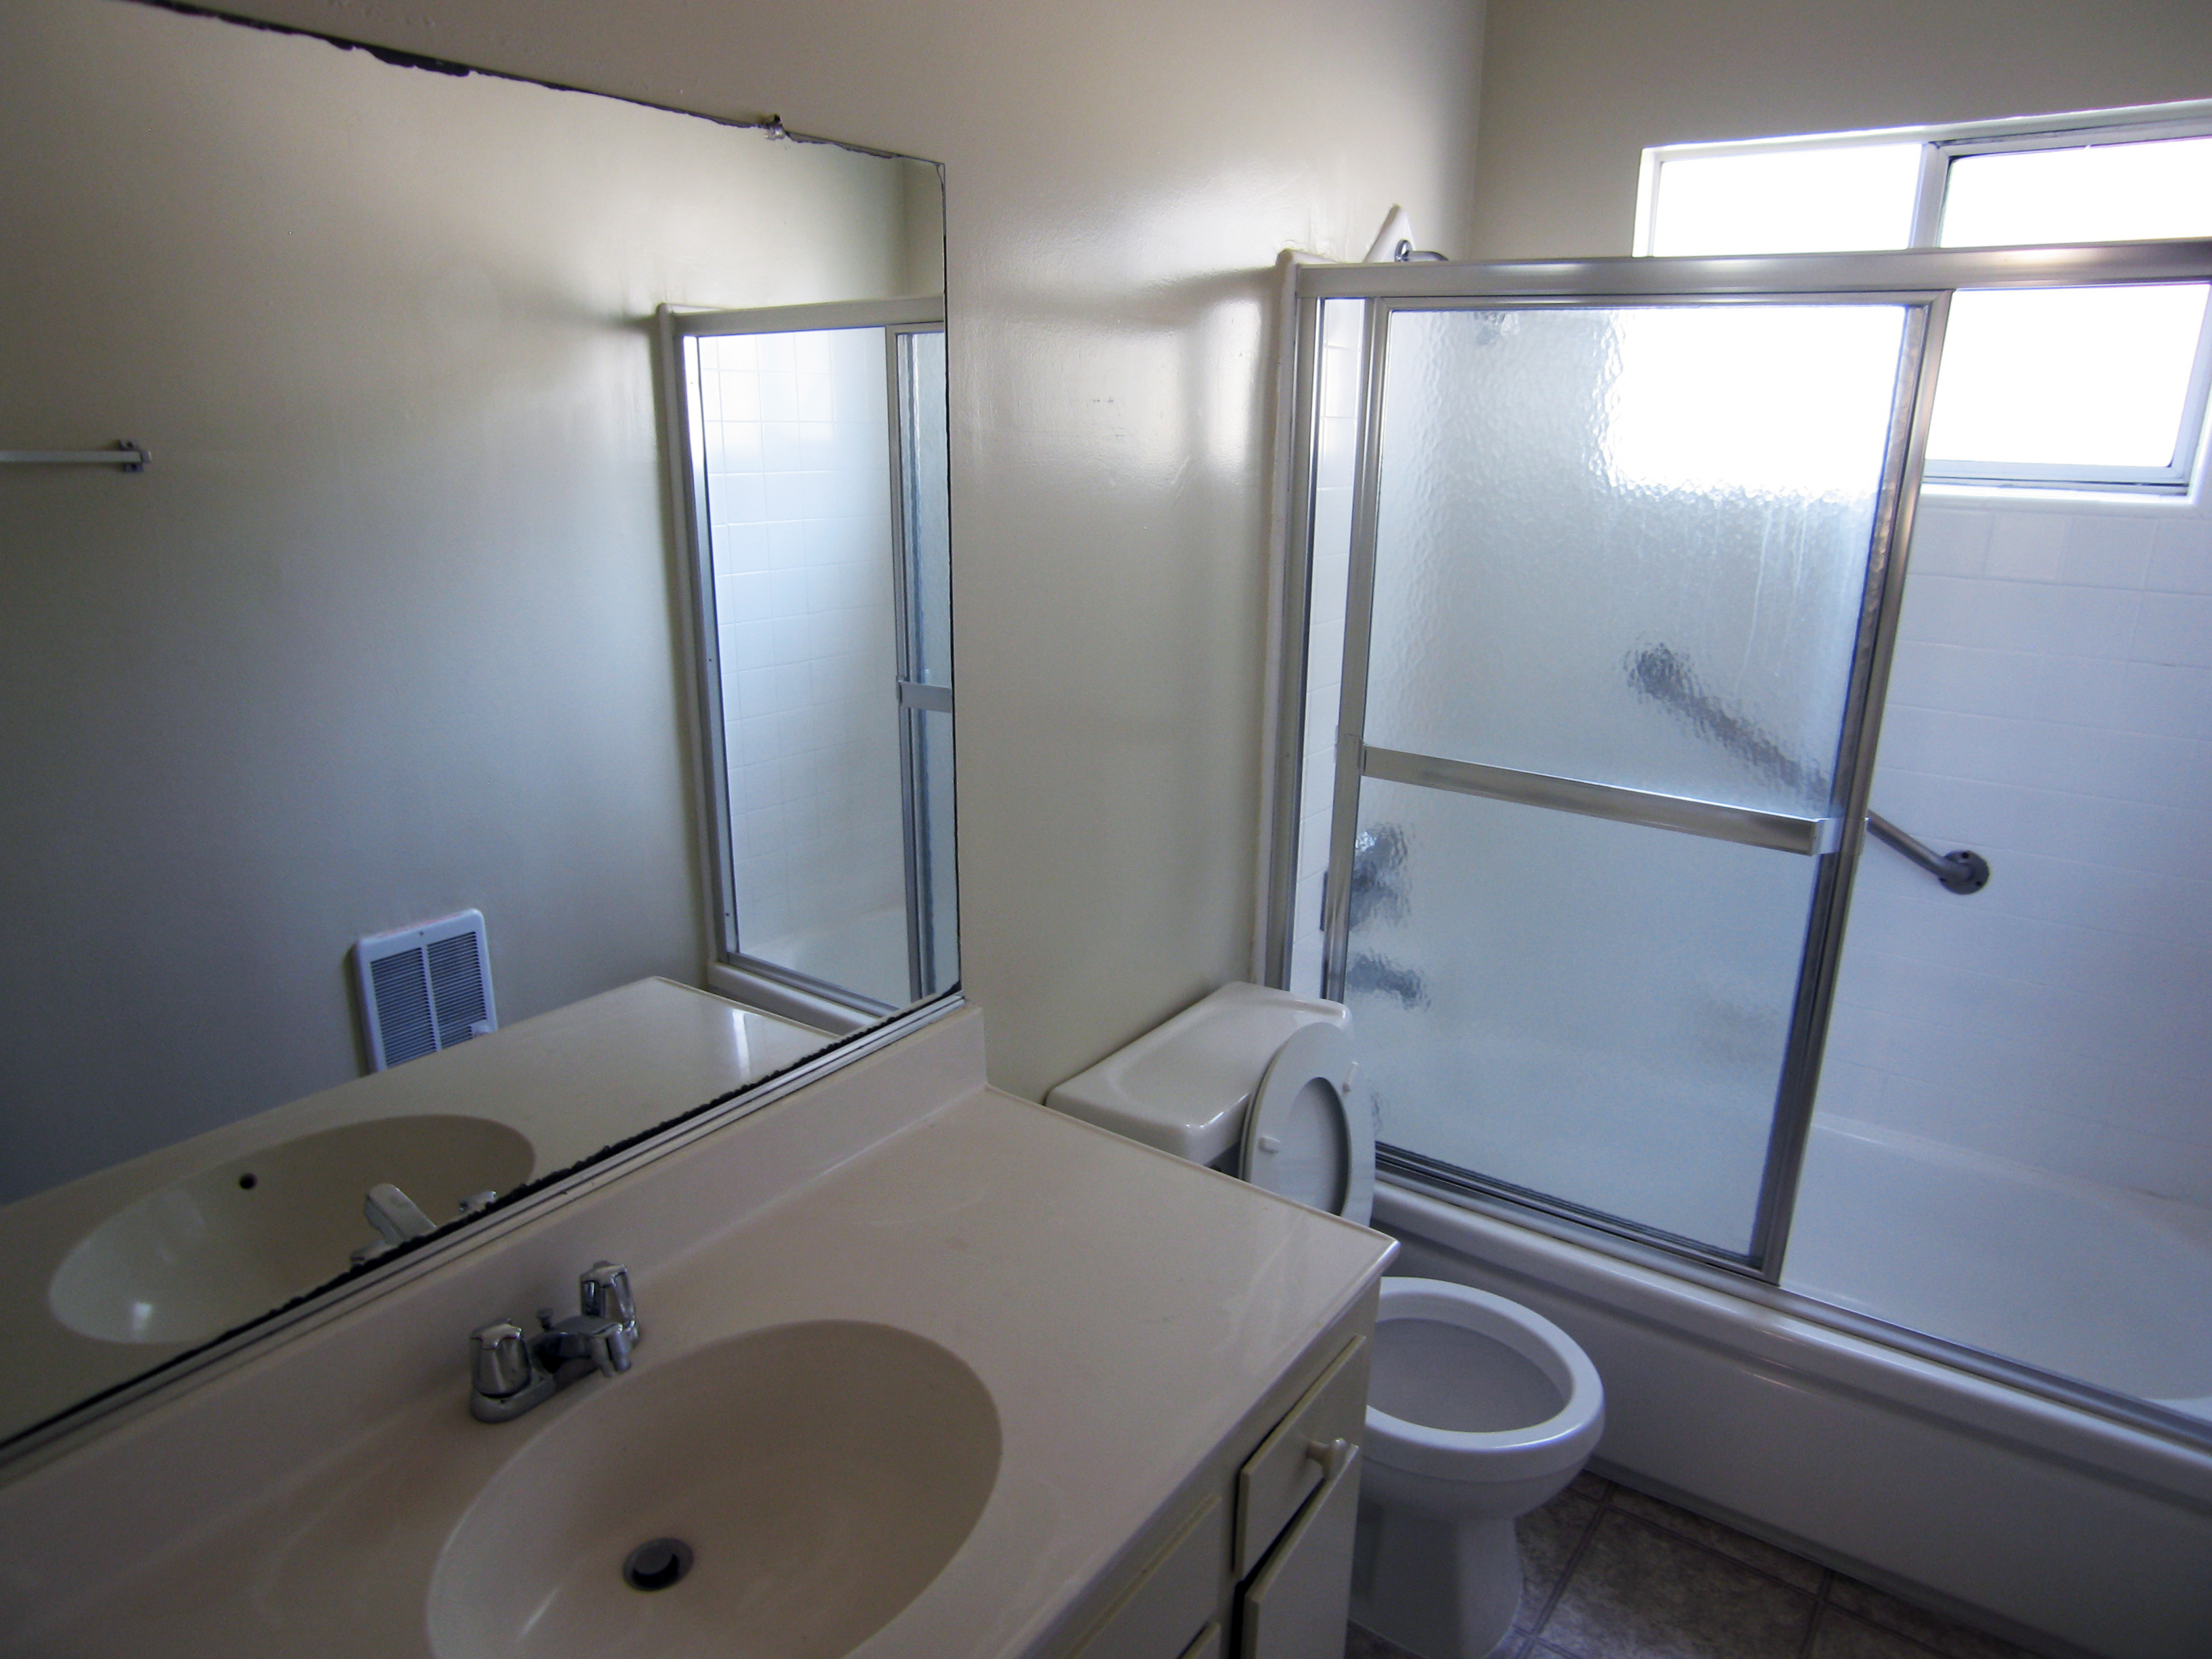 Image of the apartment bathroom